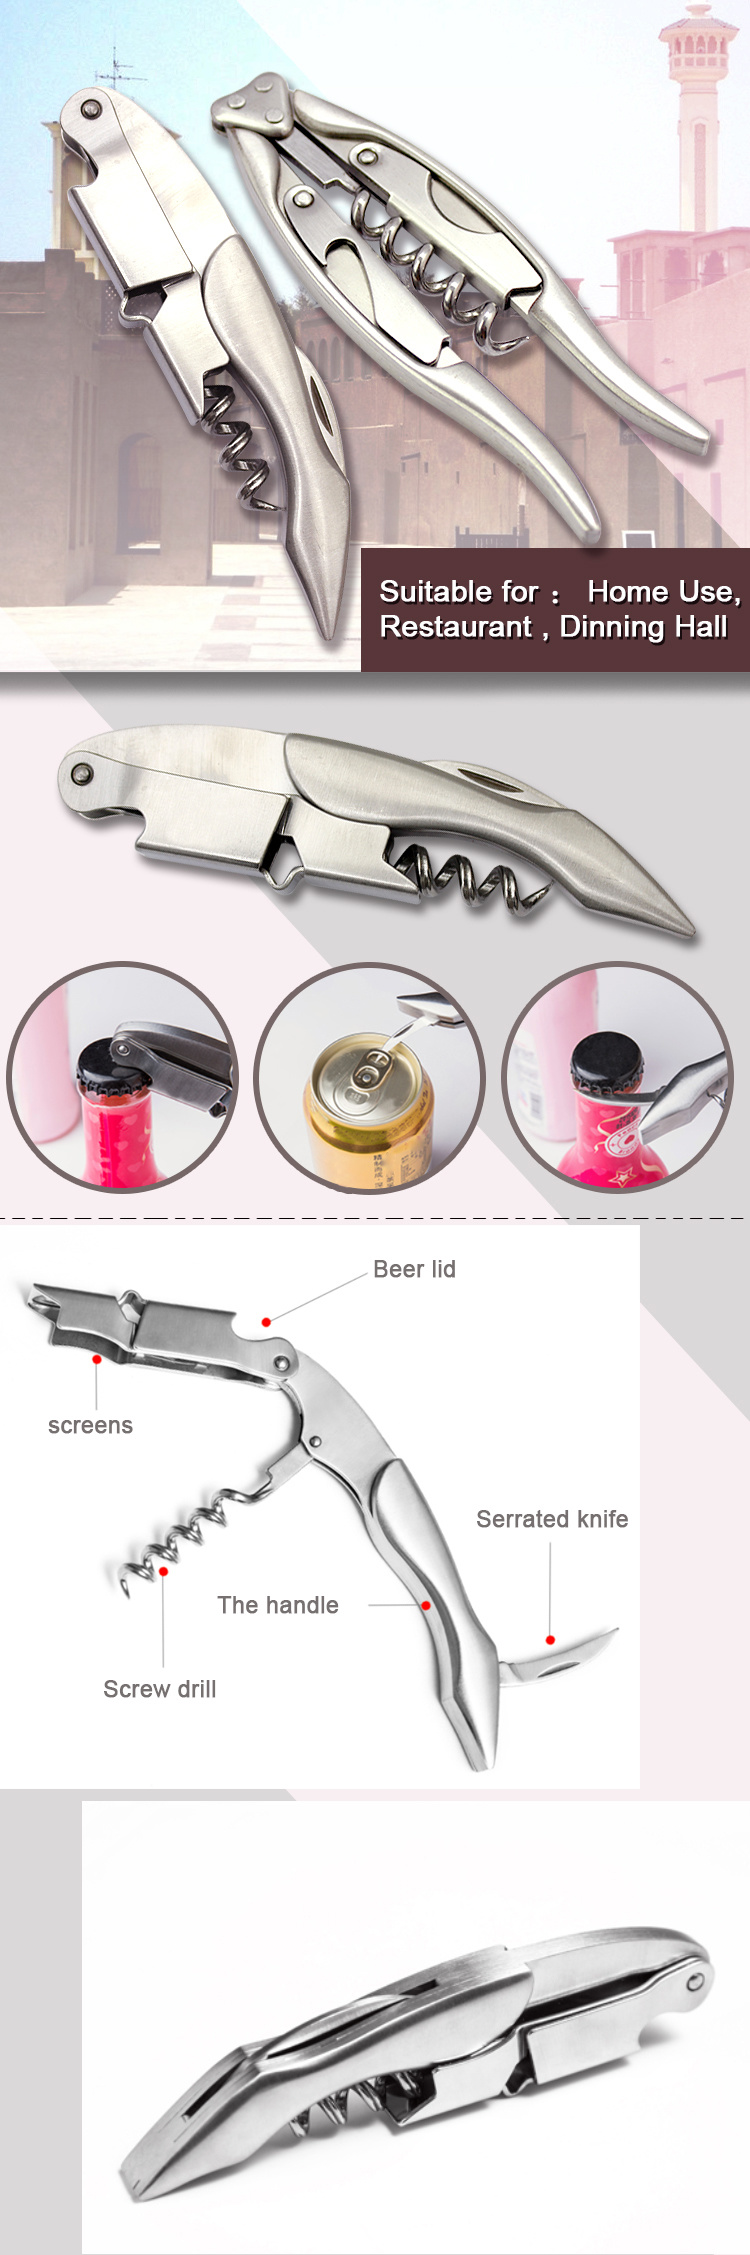 Wine Opener Corkscrew, Corkscrew Wine Opener, Wine Bottle Opener with Good Quality